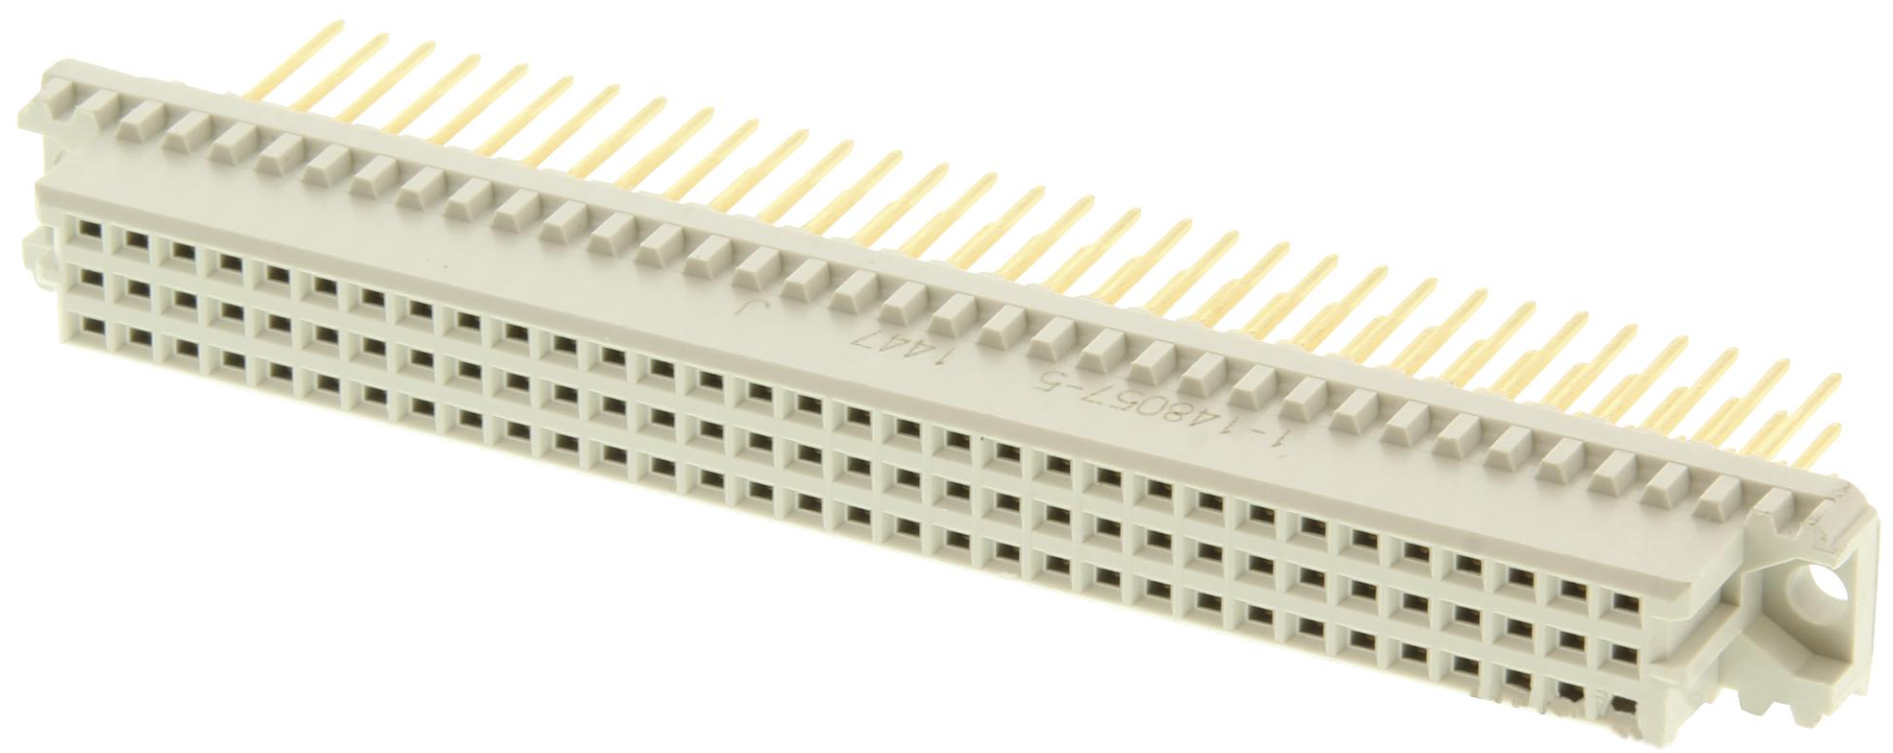 TE Connectivity 1-148057-5 роз'єм, DIN 41612, Eurocard Type C, 96 Contacts, Receptacle, 2.54 mm, 3 Row, a+b+c